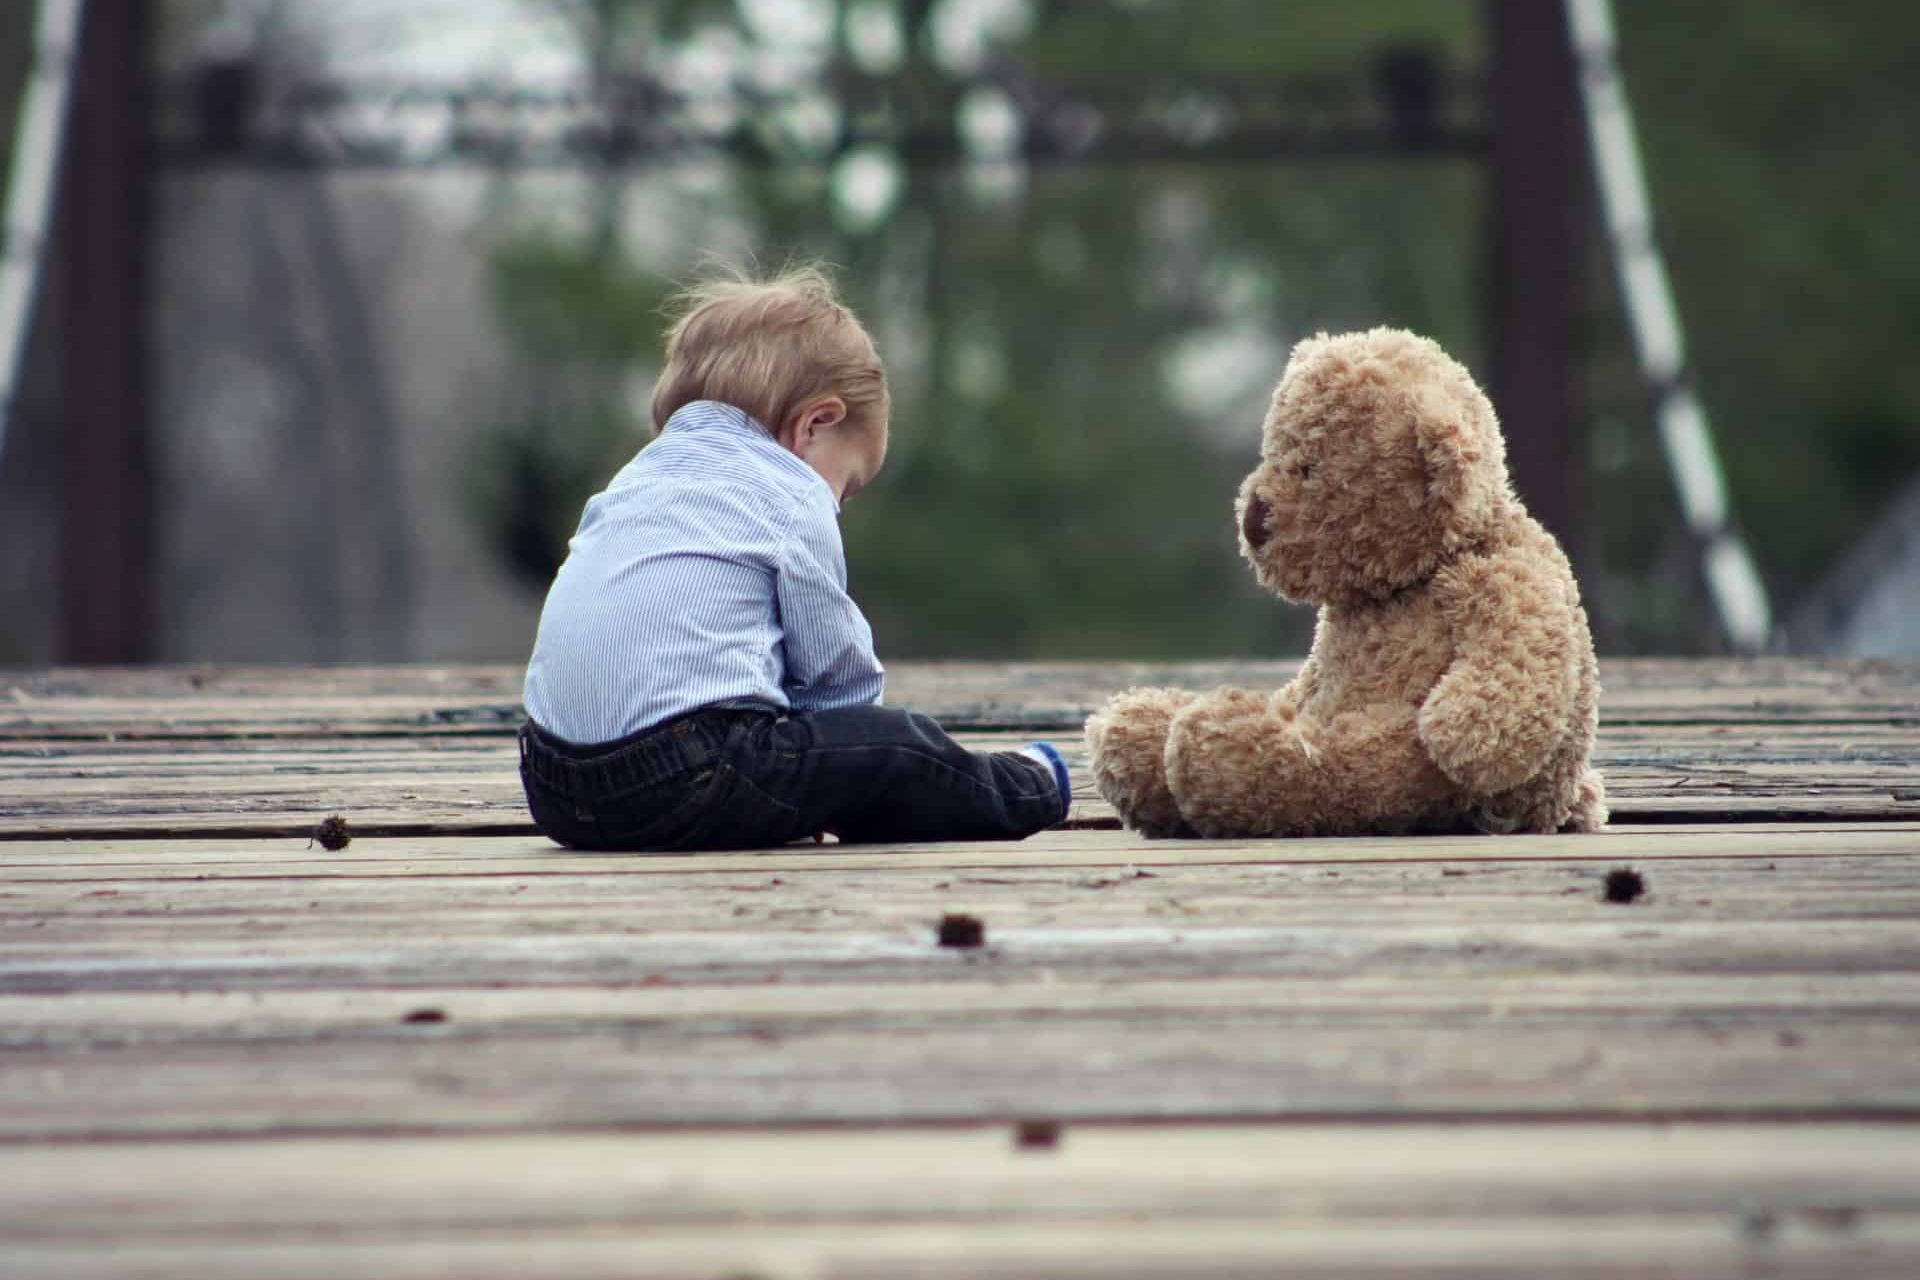 A young boy with his teddy bear on a wooden bridge